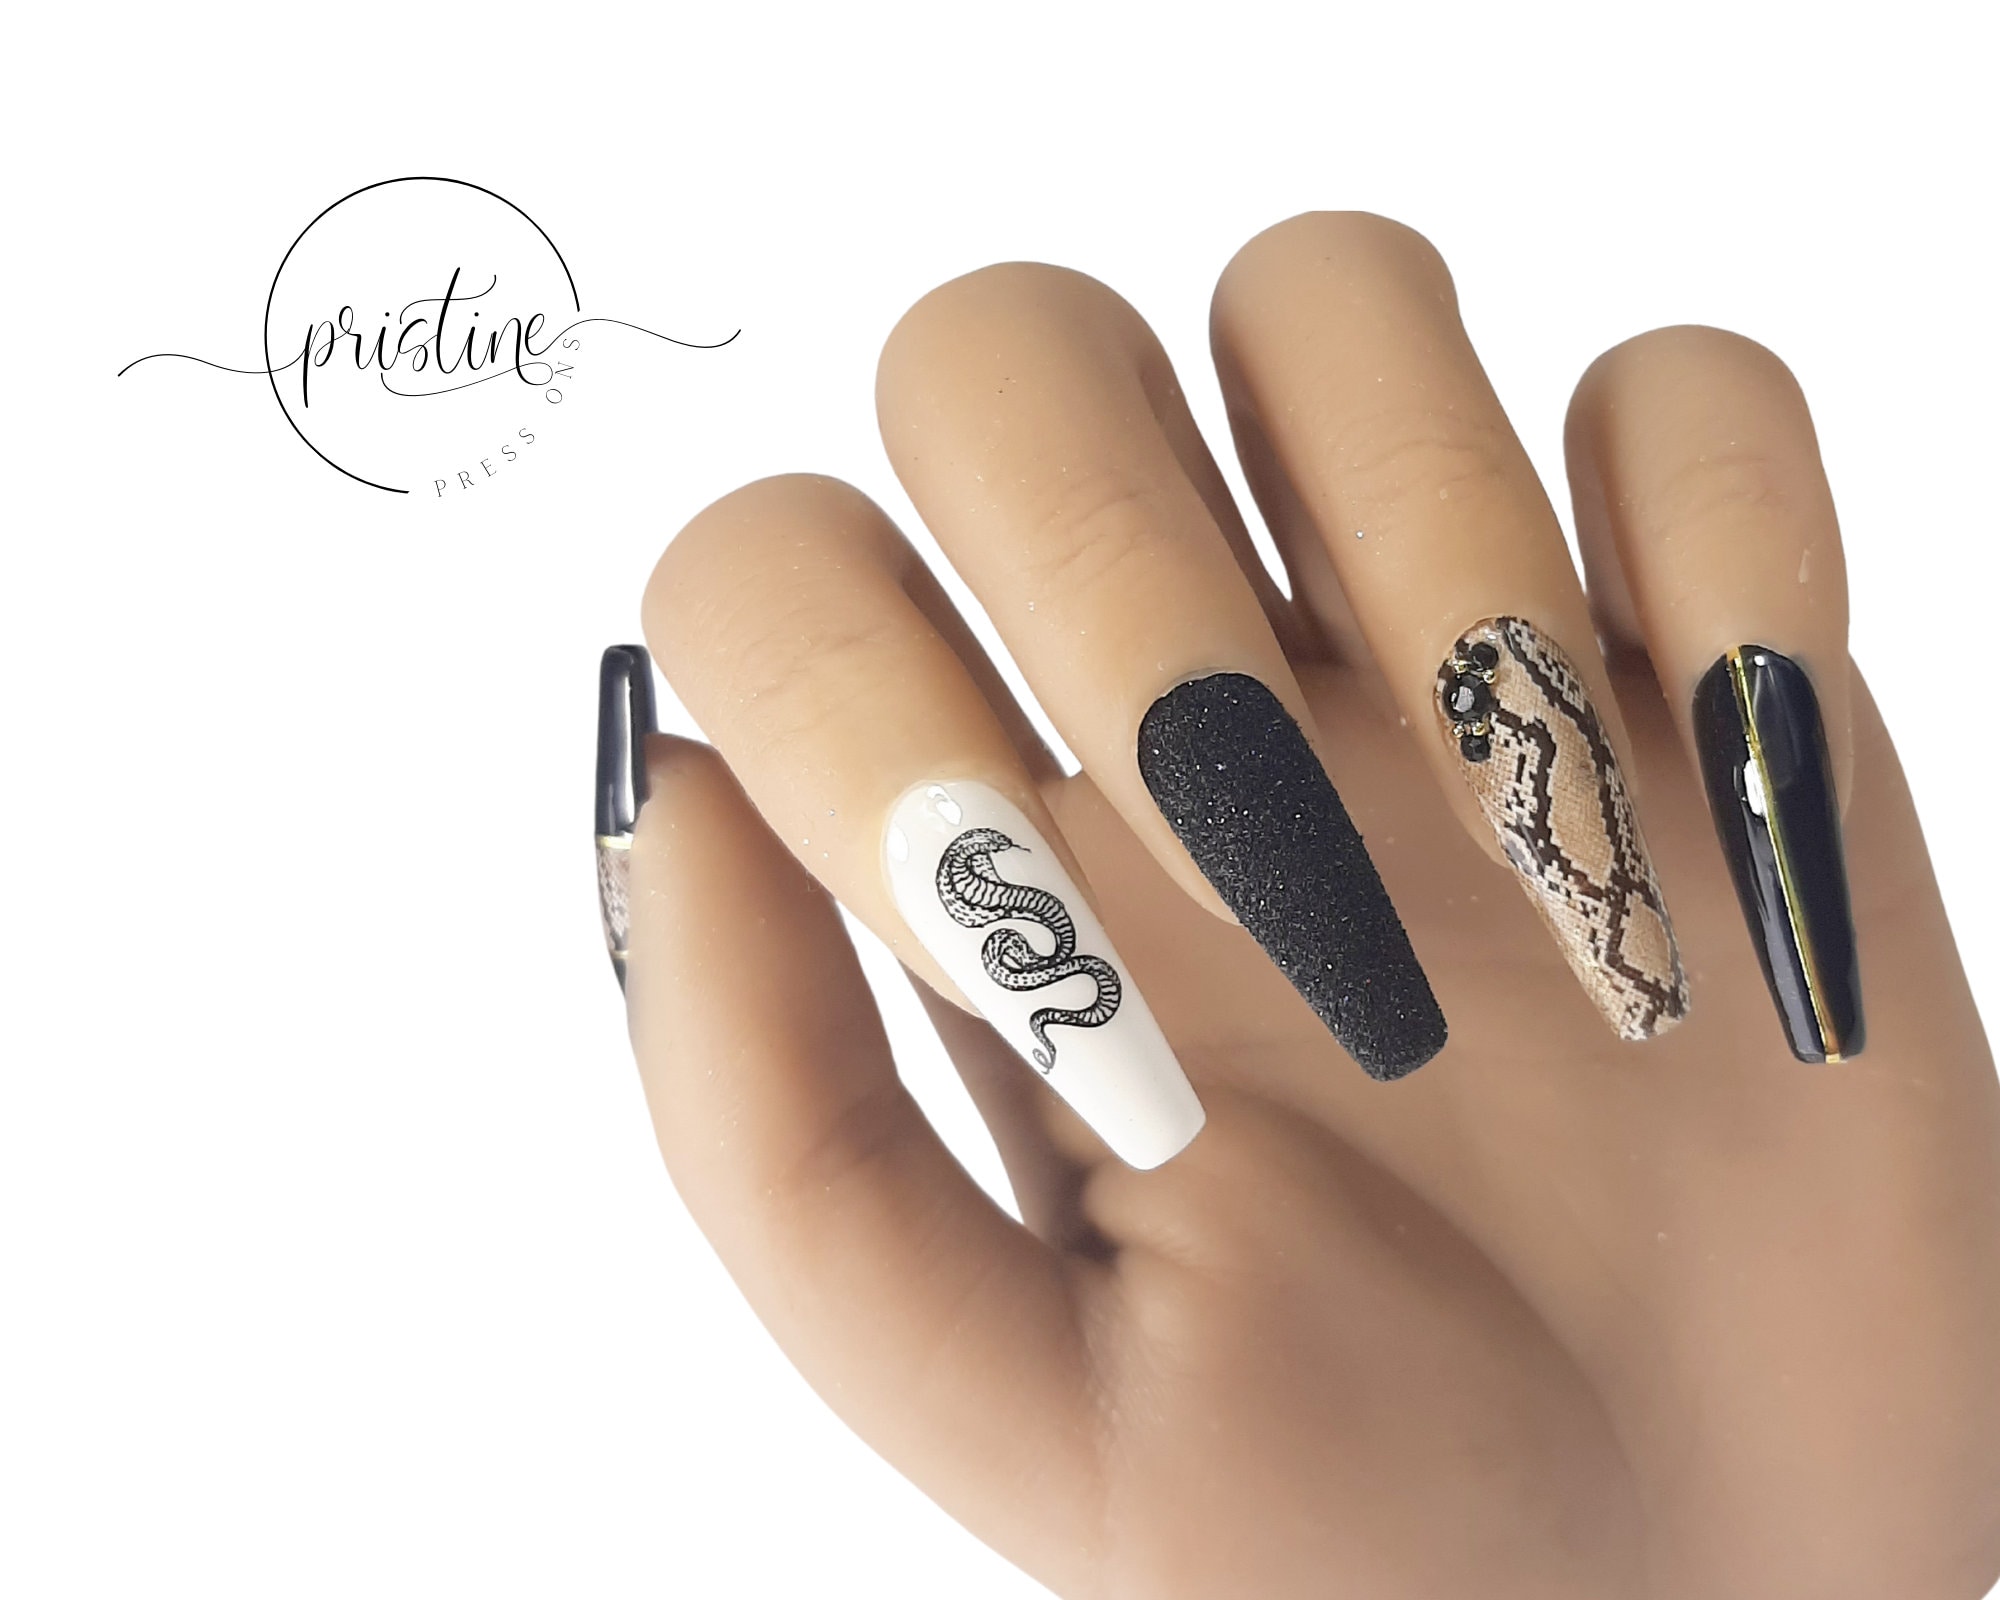 7. Black and White Snake Nails - wide 1